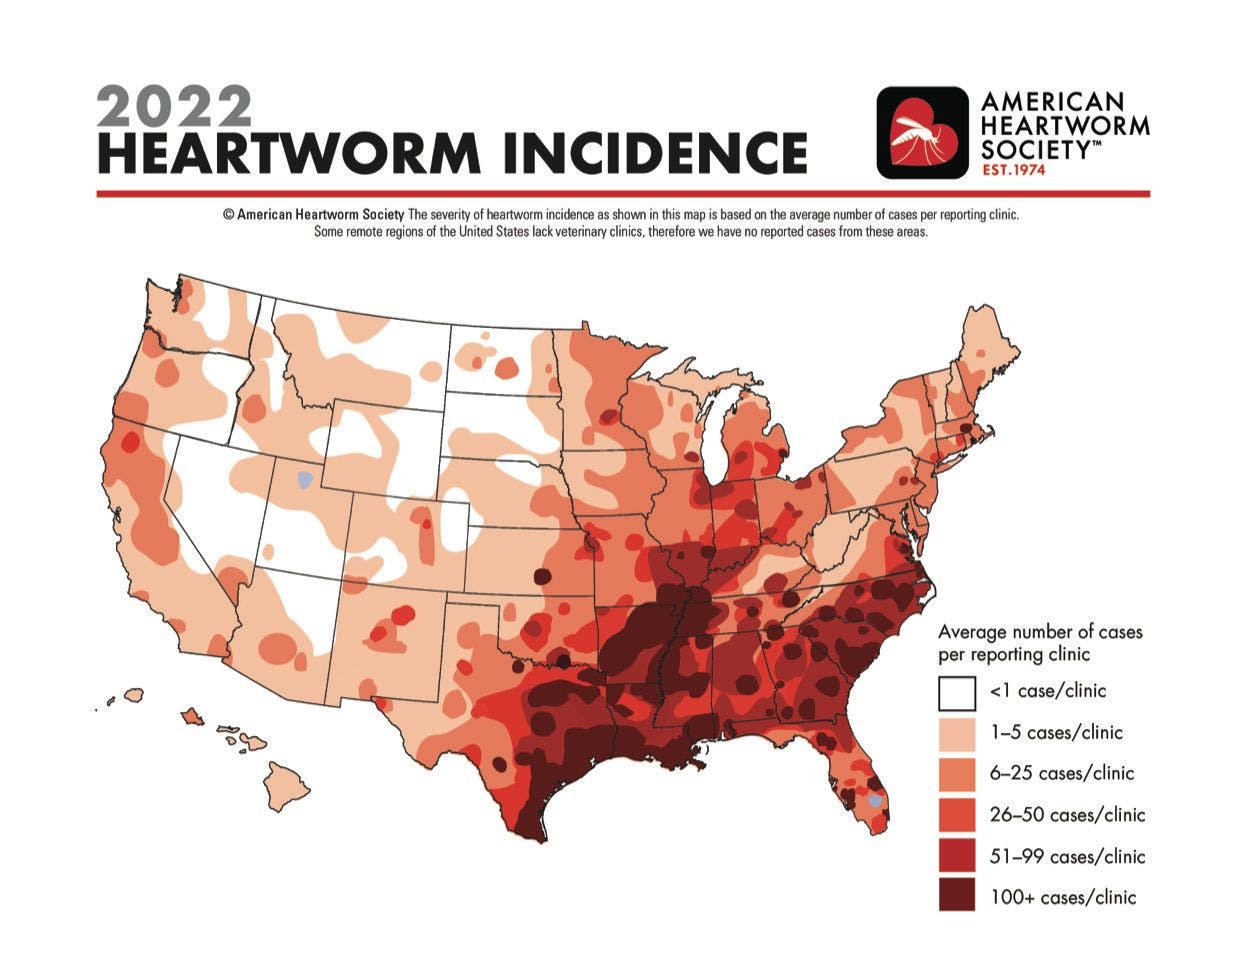 New Heartworm Incidence Map shows increase in parasitic cases